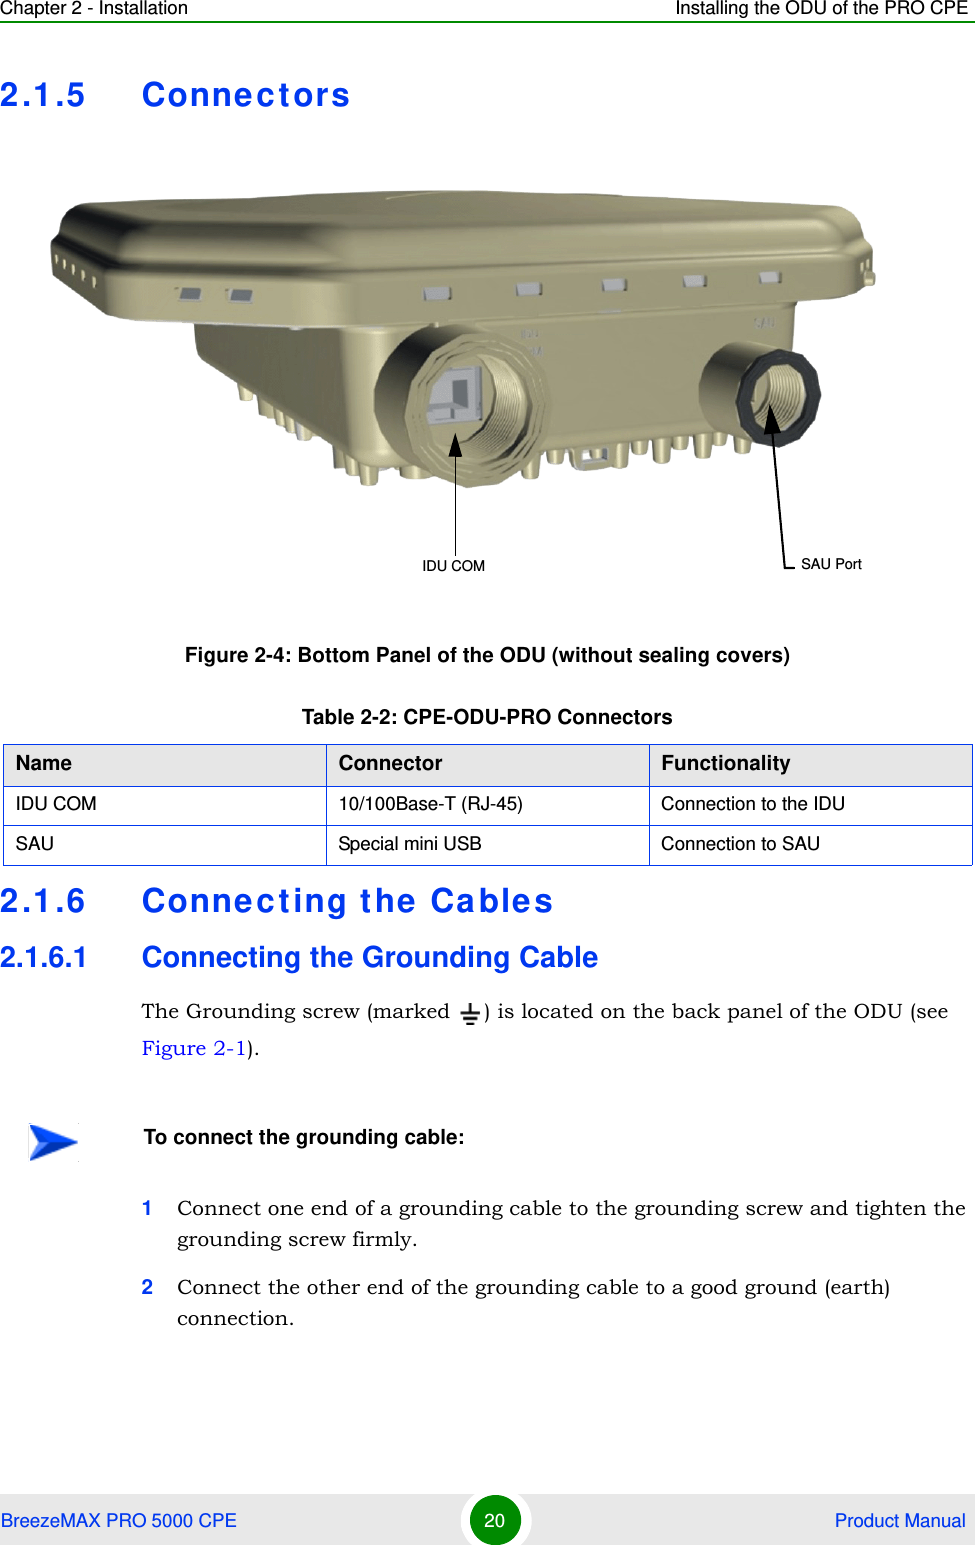 Chapter 2 - Installation Installing the ODU of the PRO CPEBreezeMAX PRO 5000 CPE 20  Product Manual2.1.5 Connectors2.1.6 Connecting the Cables2.1.6.1 Connecting the Grounding CableThe Grounding screw (marked  ) is located on the back panel of the ODU (see Figure 2-1).1Connect one end of a grounding cable to the grounding screw and tighten the grounding screw firmly. 2Connect the other end of the grounding cable to a good ground (earth) connection.Figure 2-4: Bottom Panel of the ODU (without sealing covers)Table 2-2: CPE-ODU-PRO ConnectorsName Connector FunctionalityIDU COM 10/100Base-T (RJ-45) Connection to the IDUSAU Special mini USB Connection to SAUTo connect the grounding cable:IDU COM SAU Port